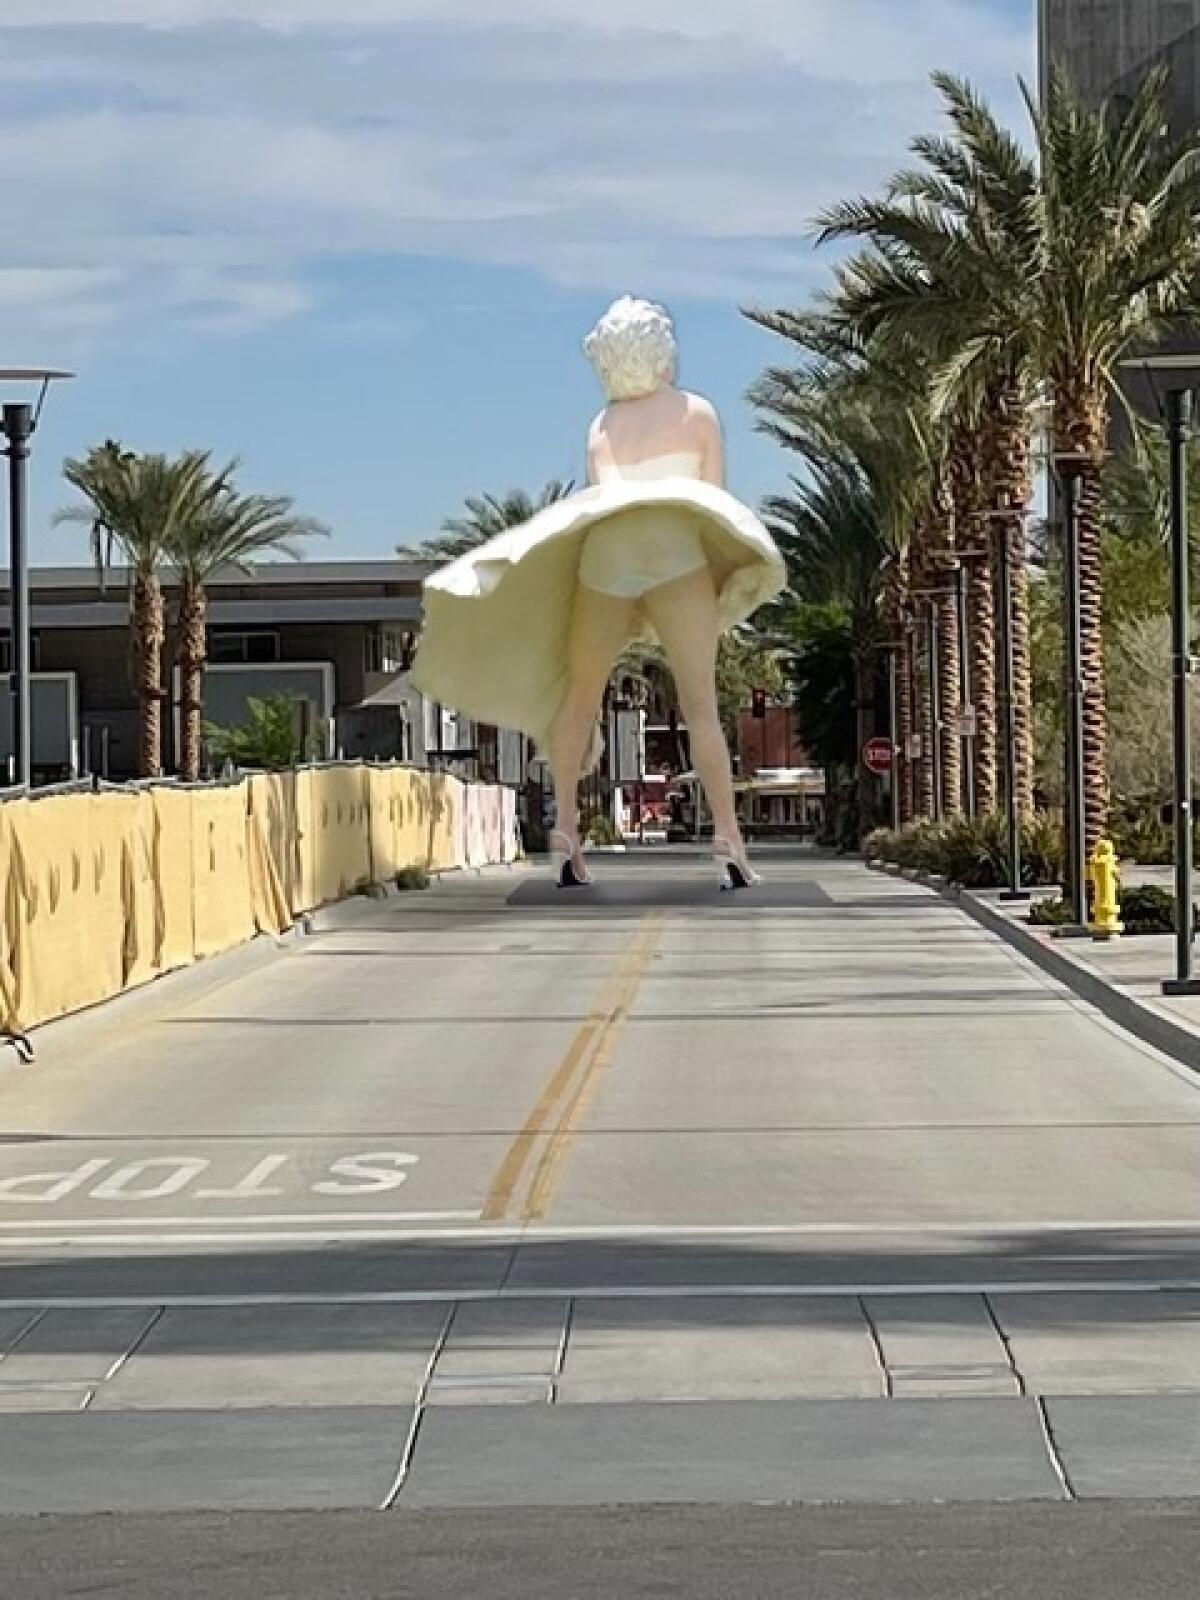 Opponents of the "Forever Marilyn" sculpture Photoshopped its image to scale on Museum Way